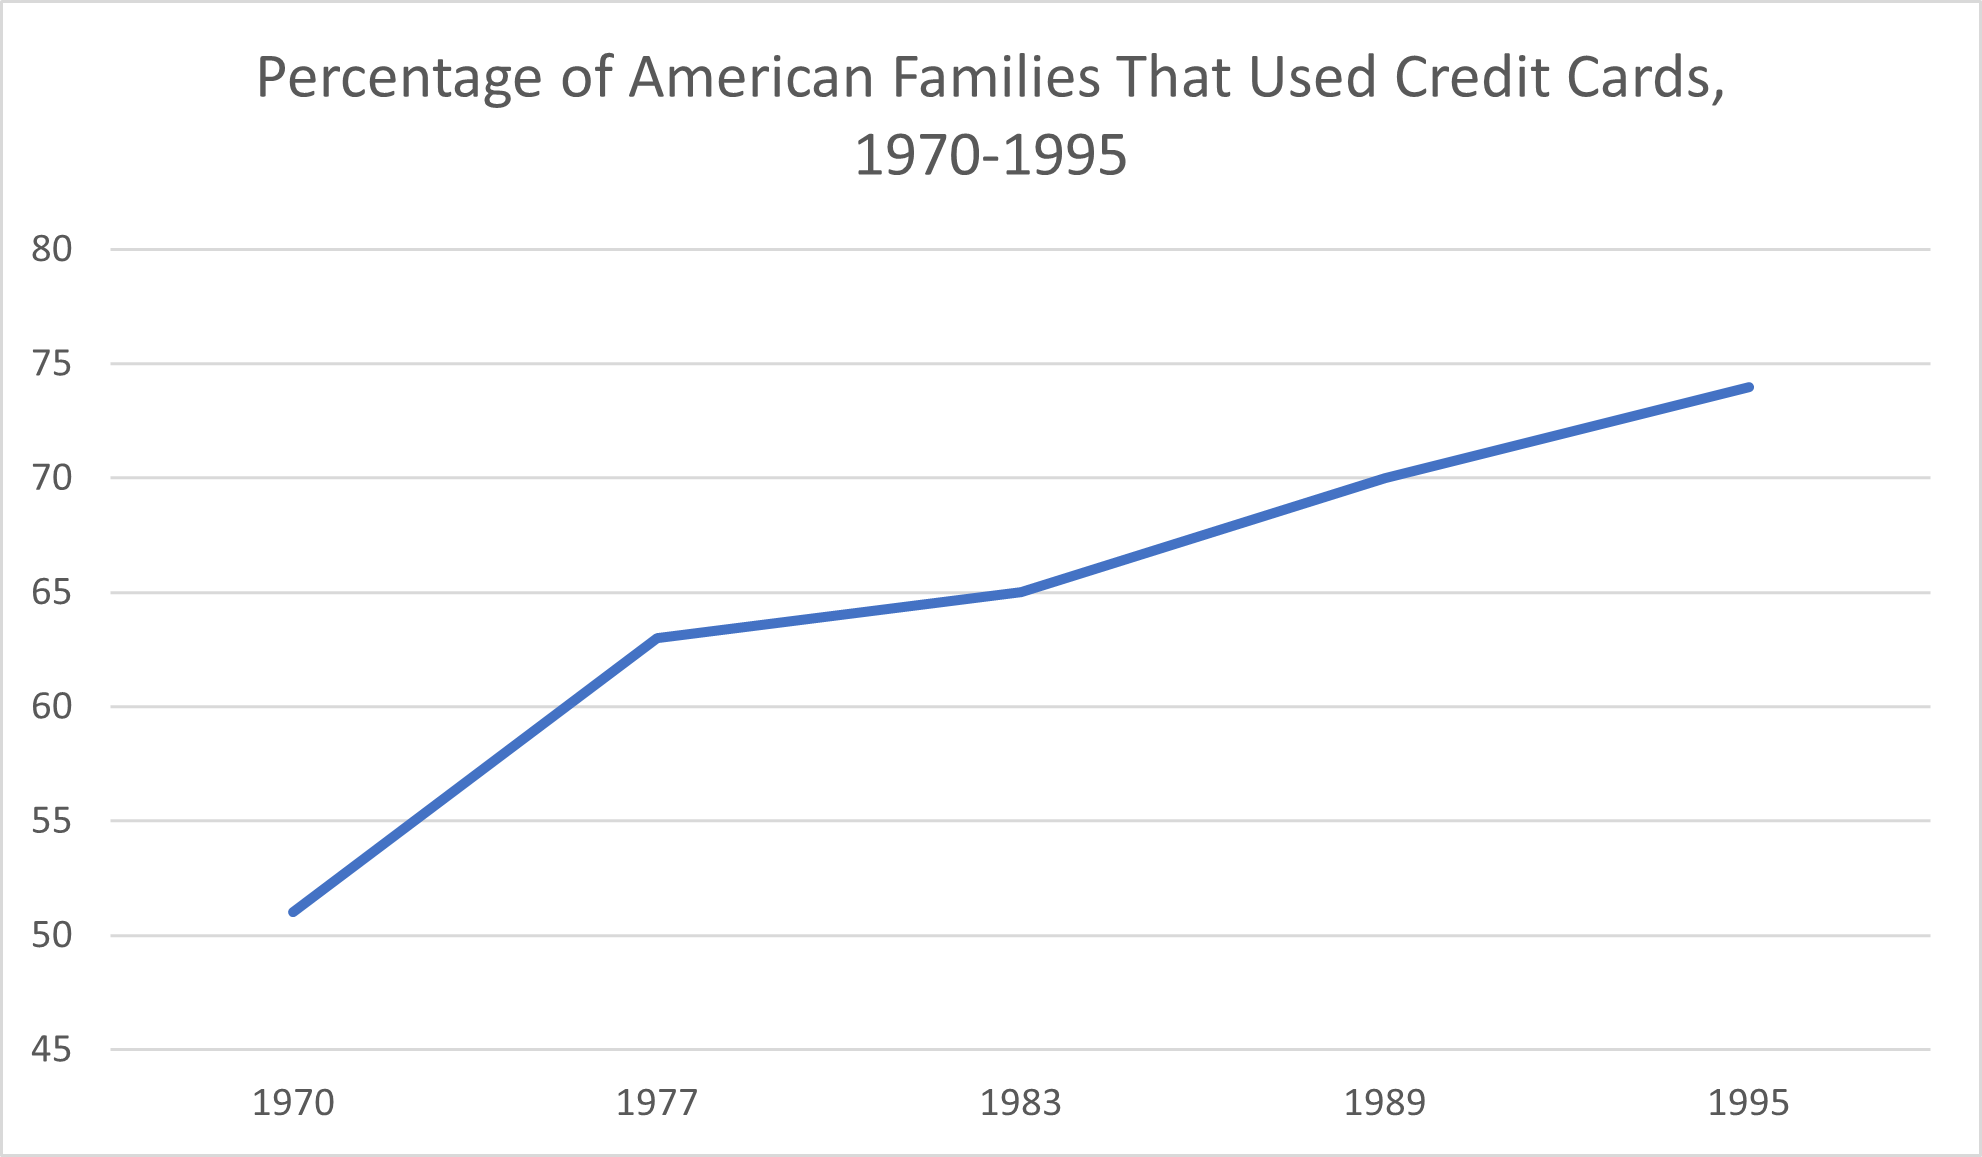 Percentage of American Families That Used Credit Cards, 1970-1995